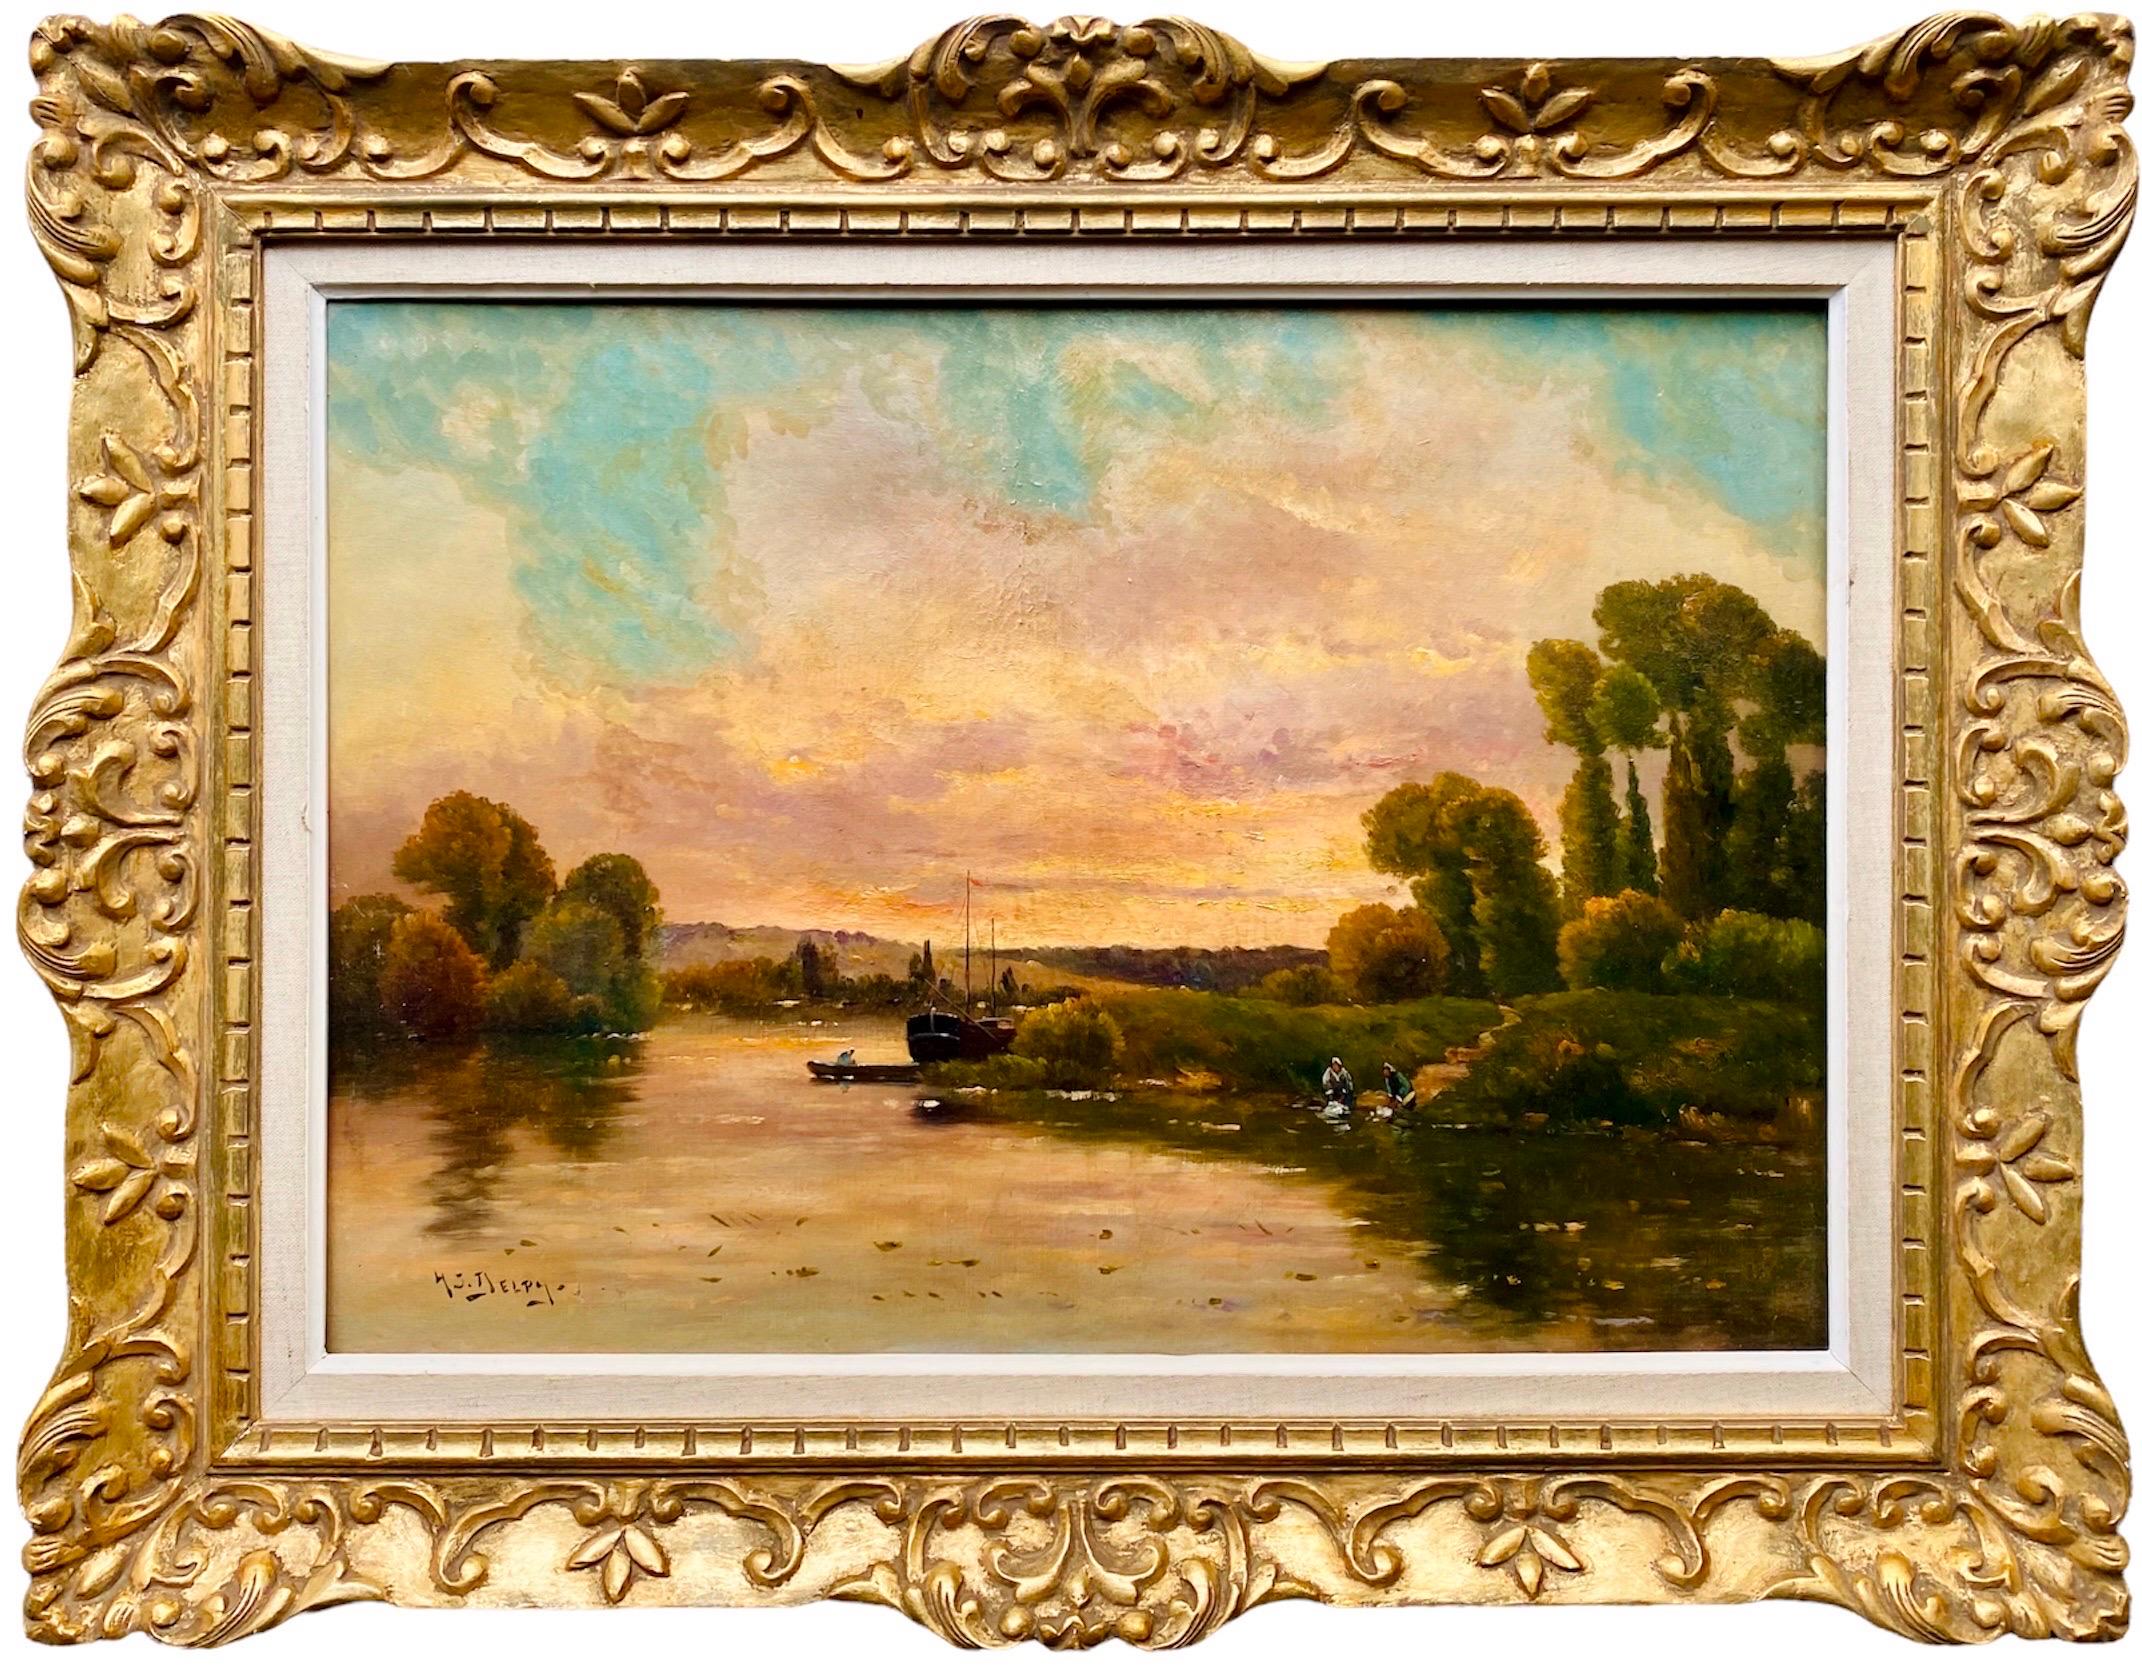 Henry Jacques Delpy Figurative Painting - French Barbizon School oil painting, Sunset over a river landscape impressionist